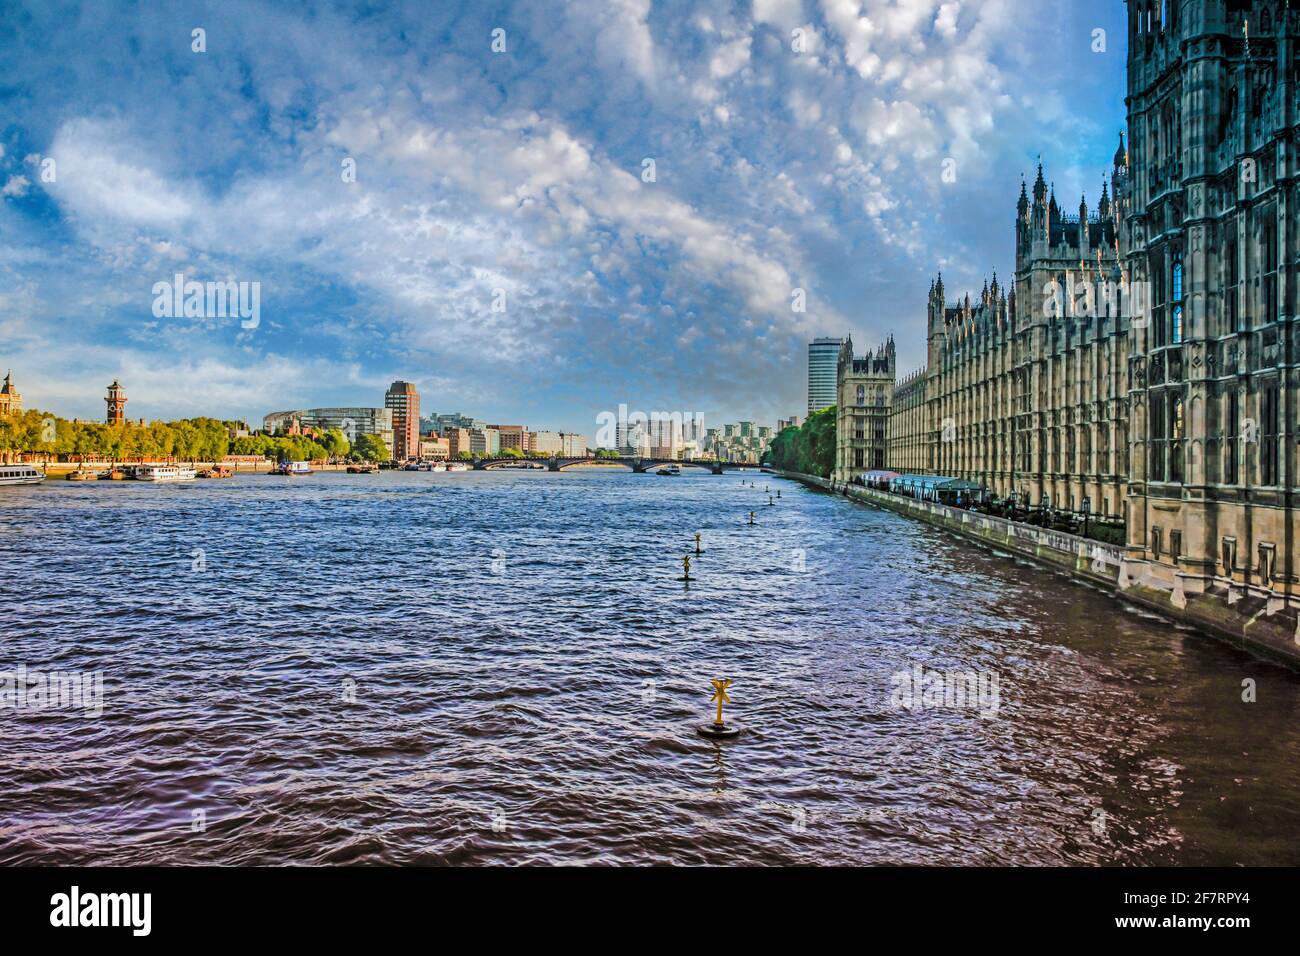 The Palace of Westminster aka Houses of Parliament by Pugin in London UK Stock Photo